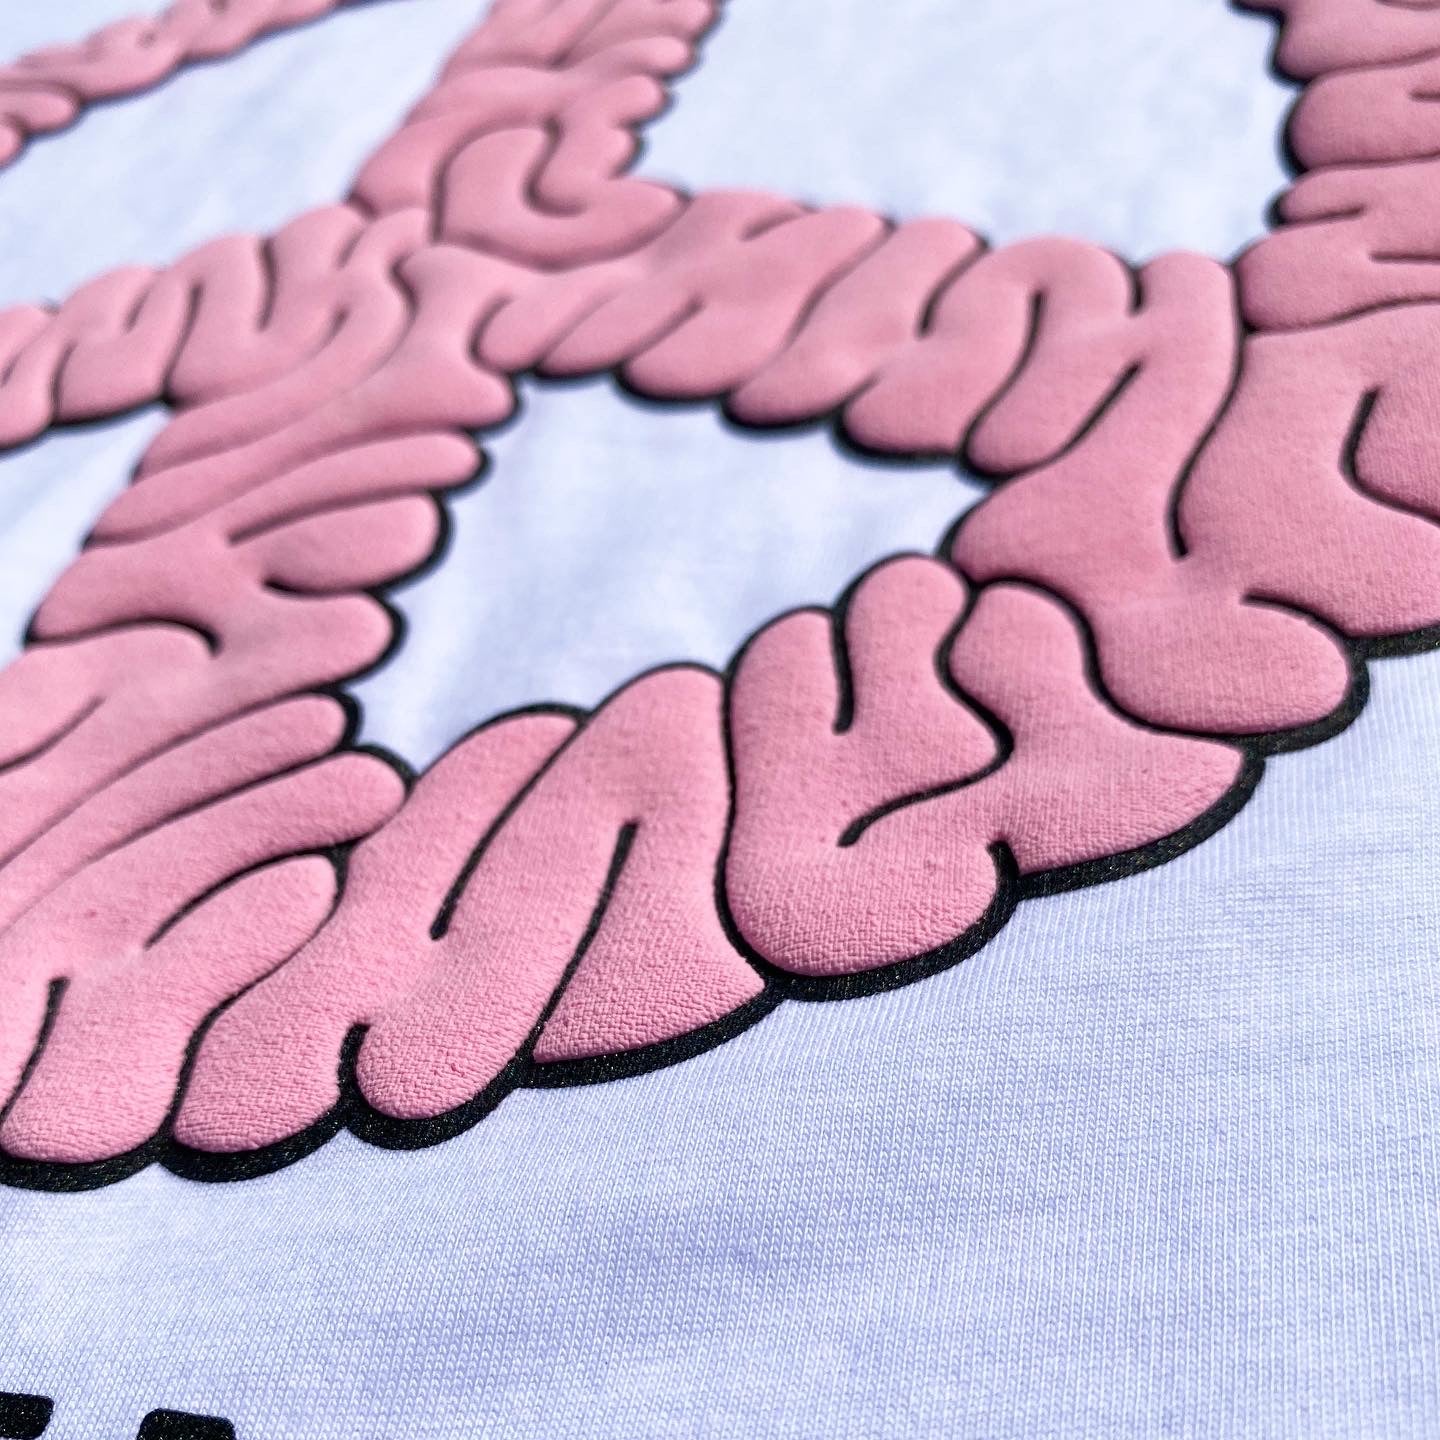 Peace of Mind T-Shirt - 'White/Pink'